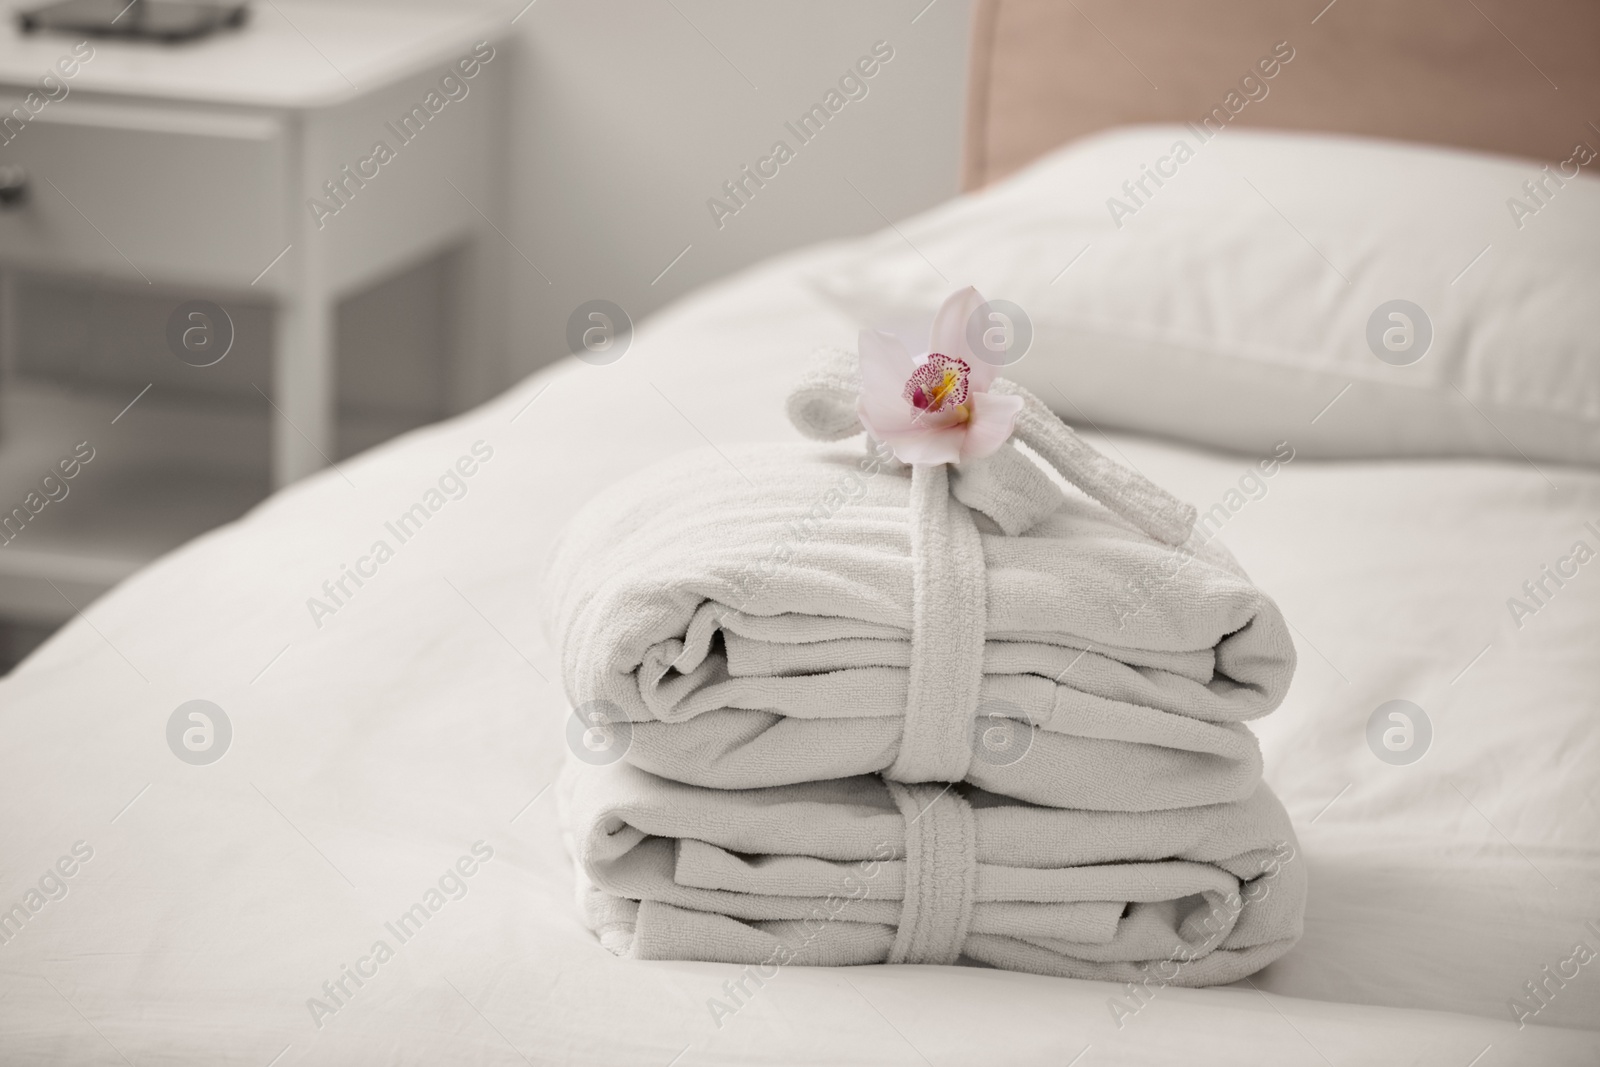 Photo of Clean folded bathrobes on bed in room